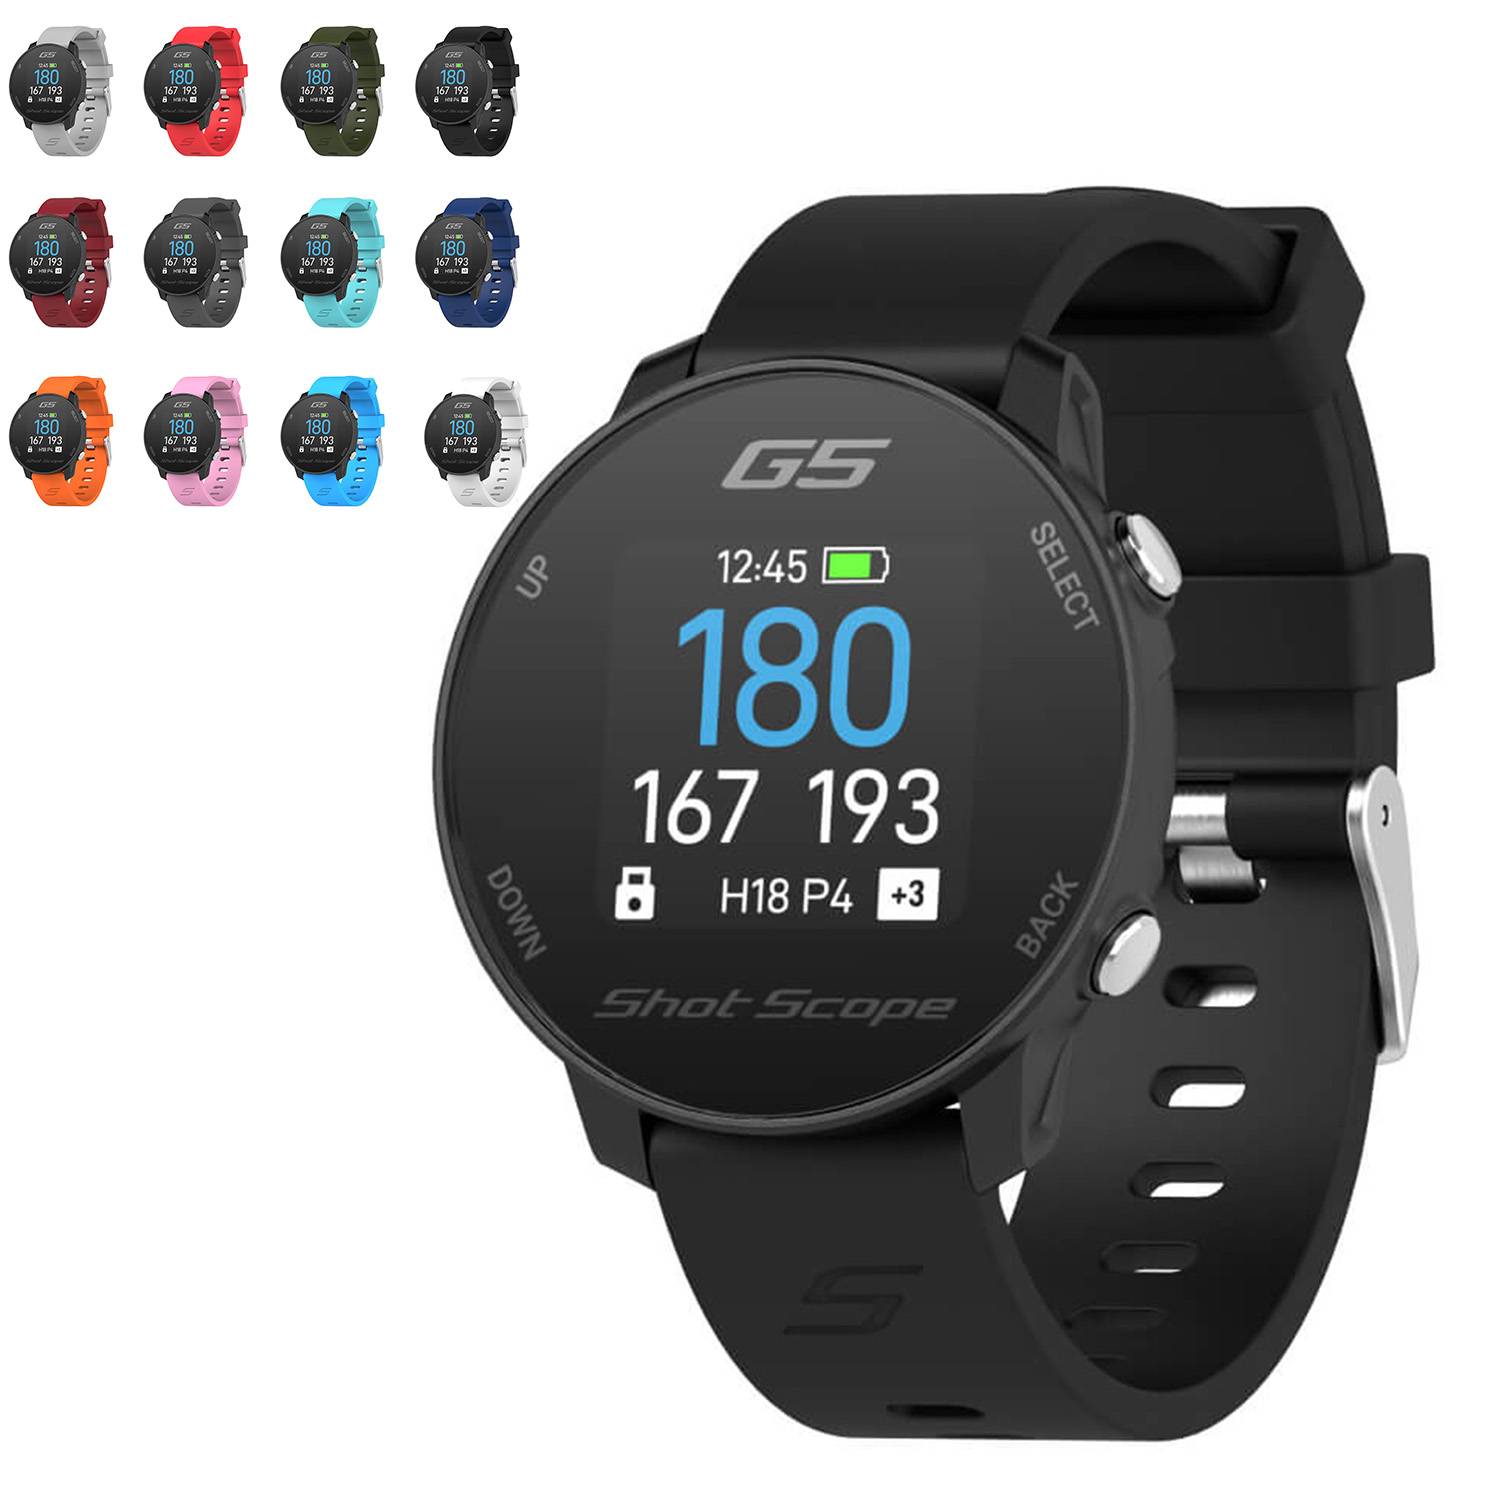 Shot Scope G5 GPS Golf Watch - Build your own